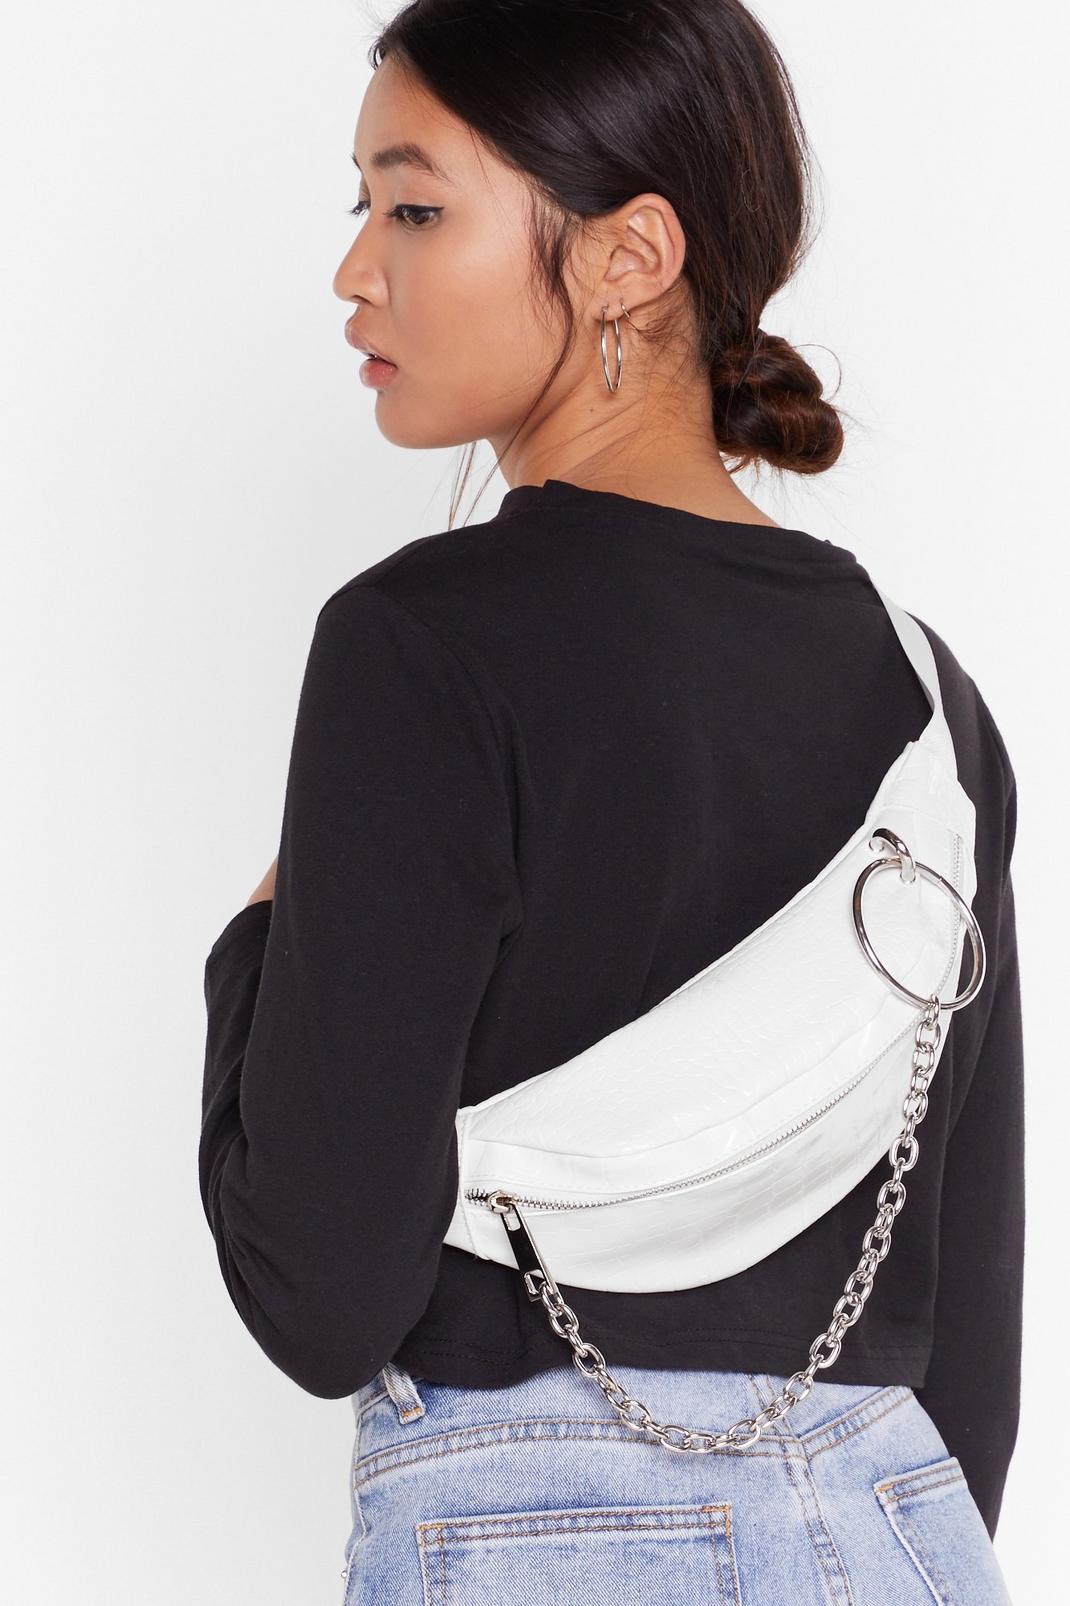 WANT O-ring the Beat Back Croc Fanny Pack | Nasty Gal